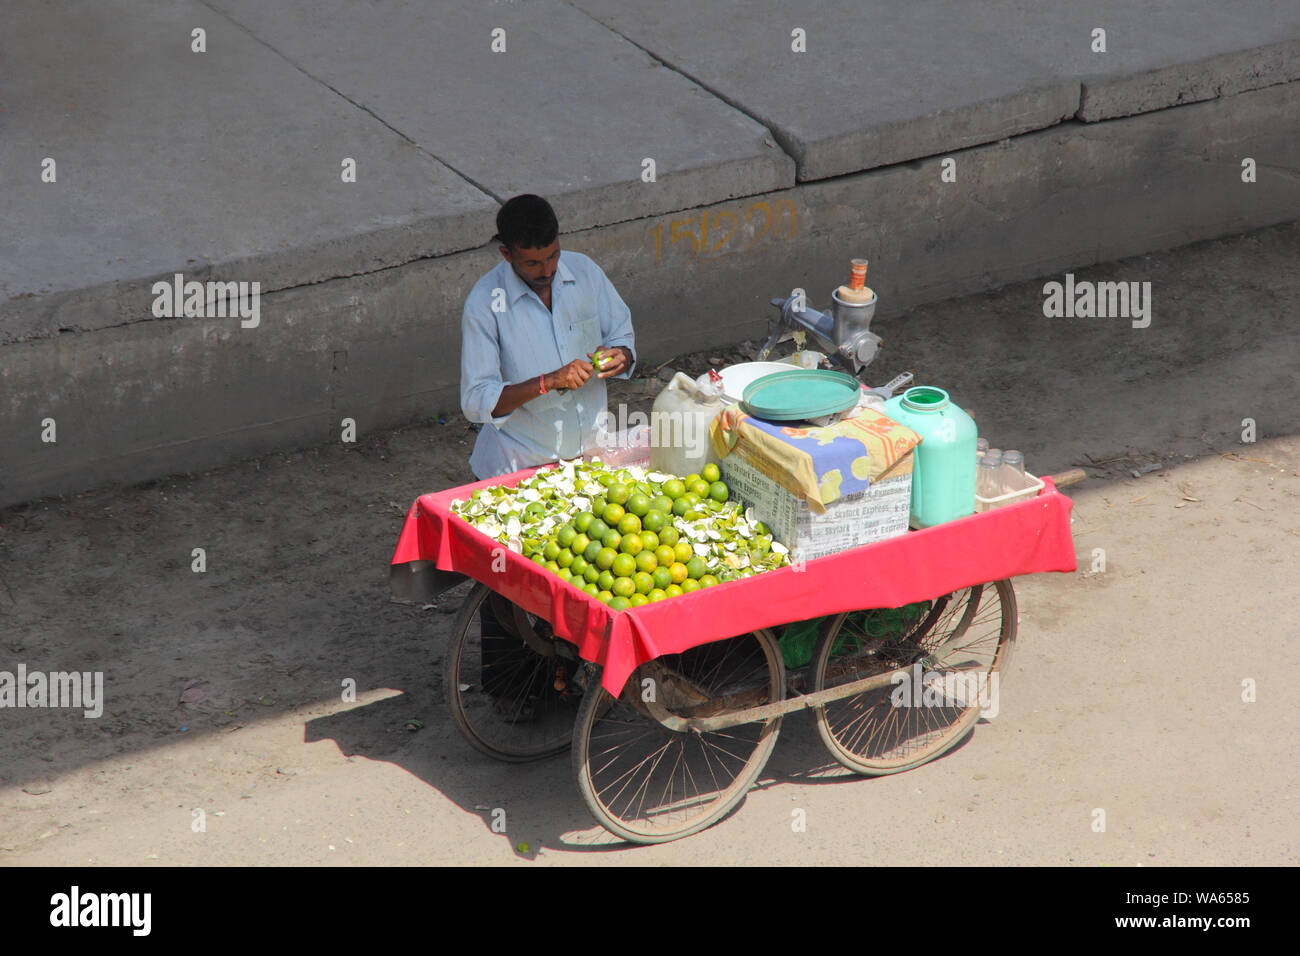 Vendor selling mausami juice at a market stall Stock Photo